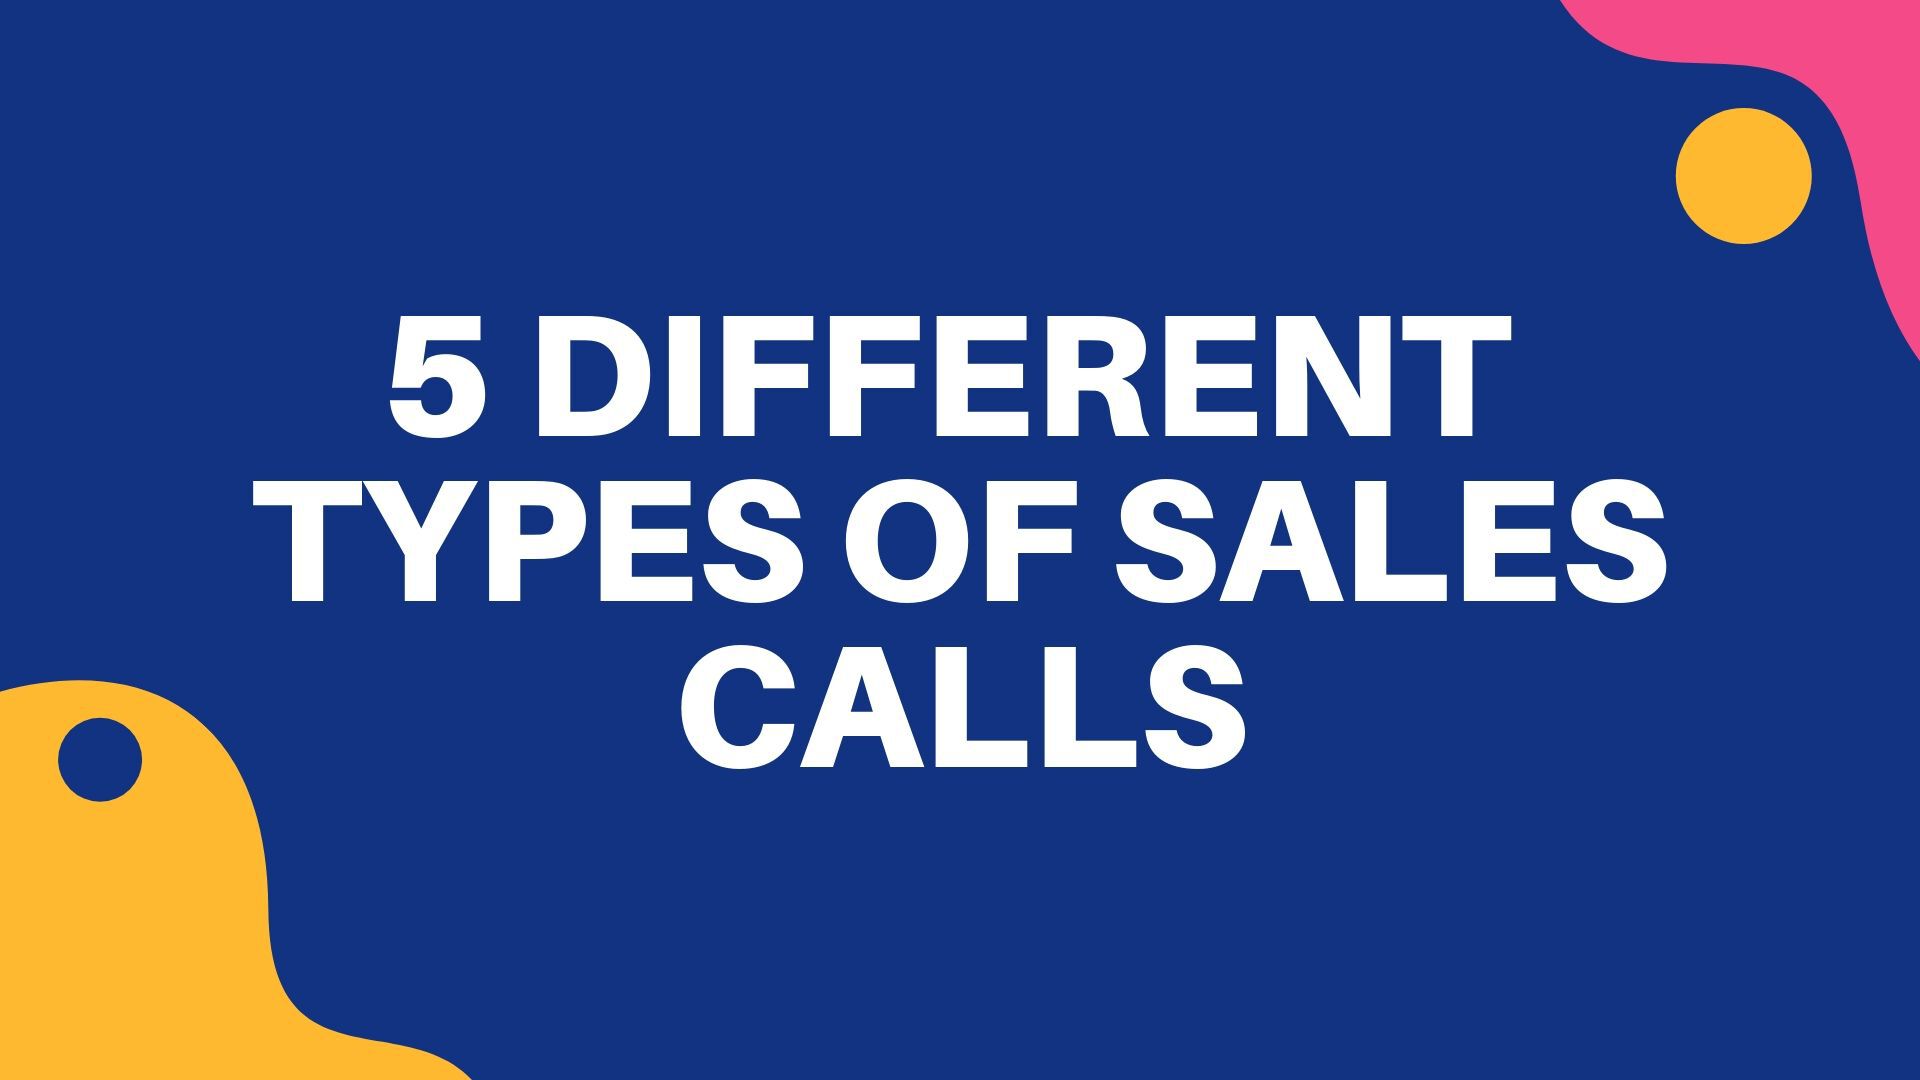 Different types of Sales calls - 1